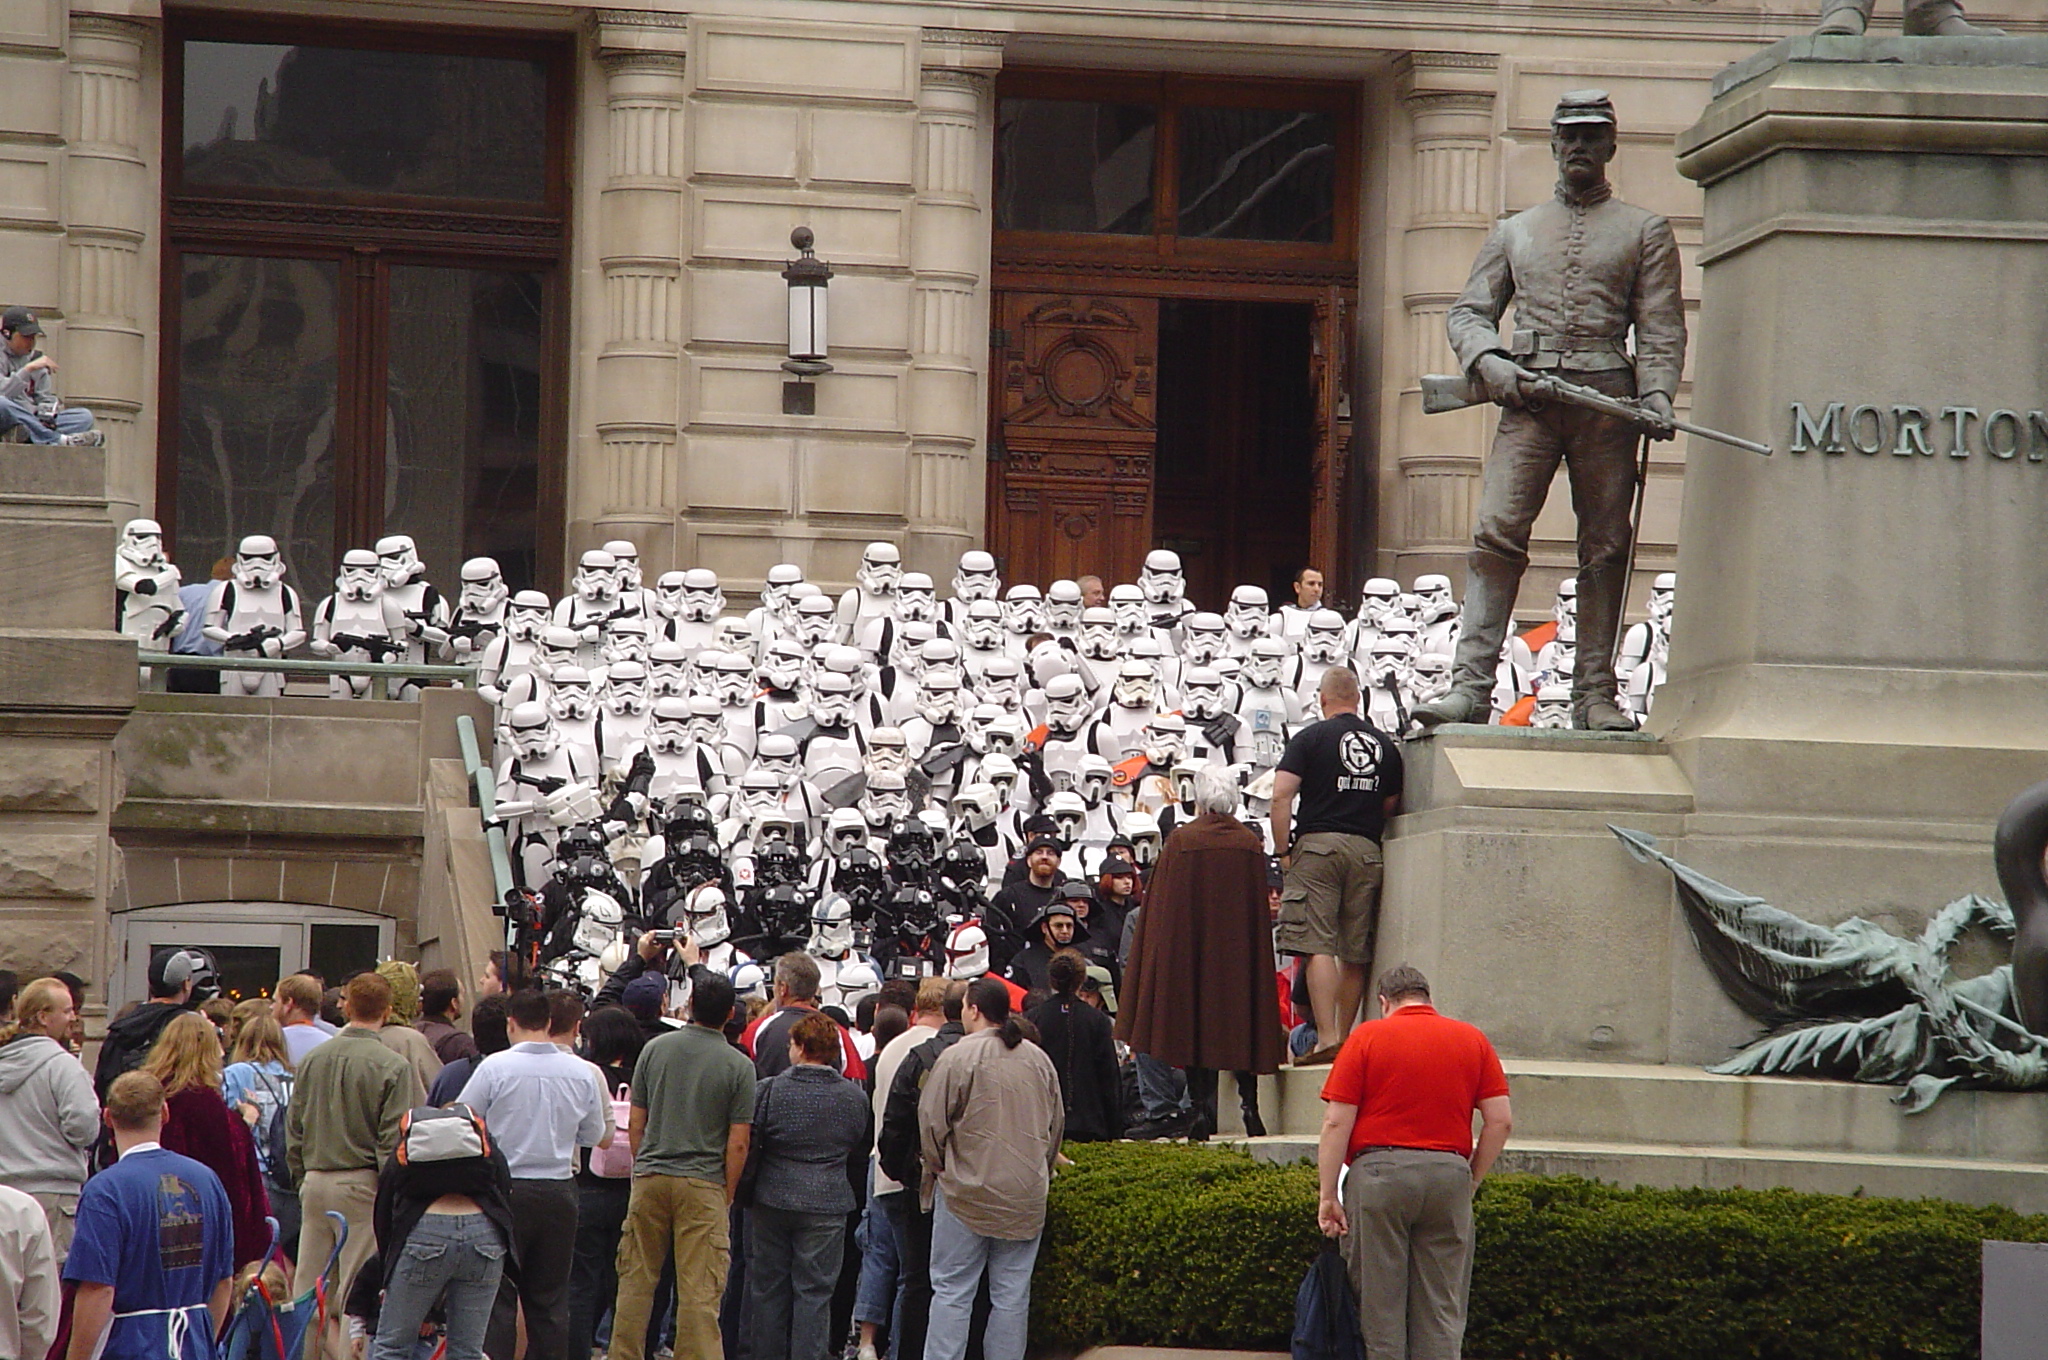 The Empire Poses for a Group Photo Before Invading the Statehouse